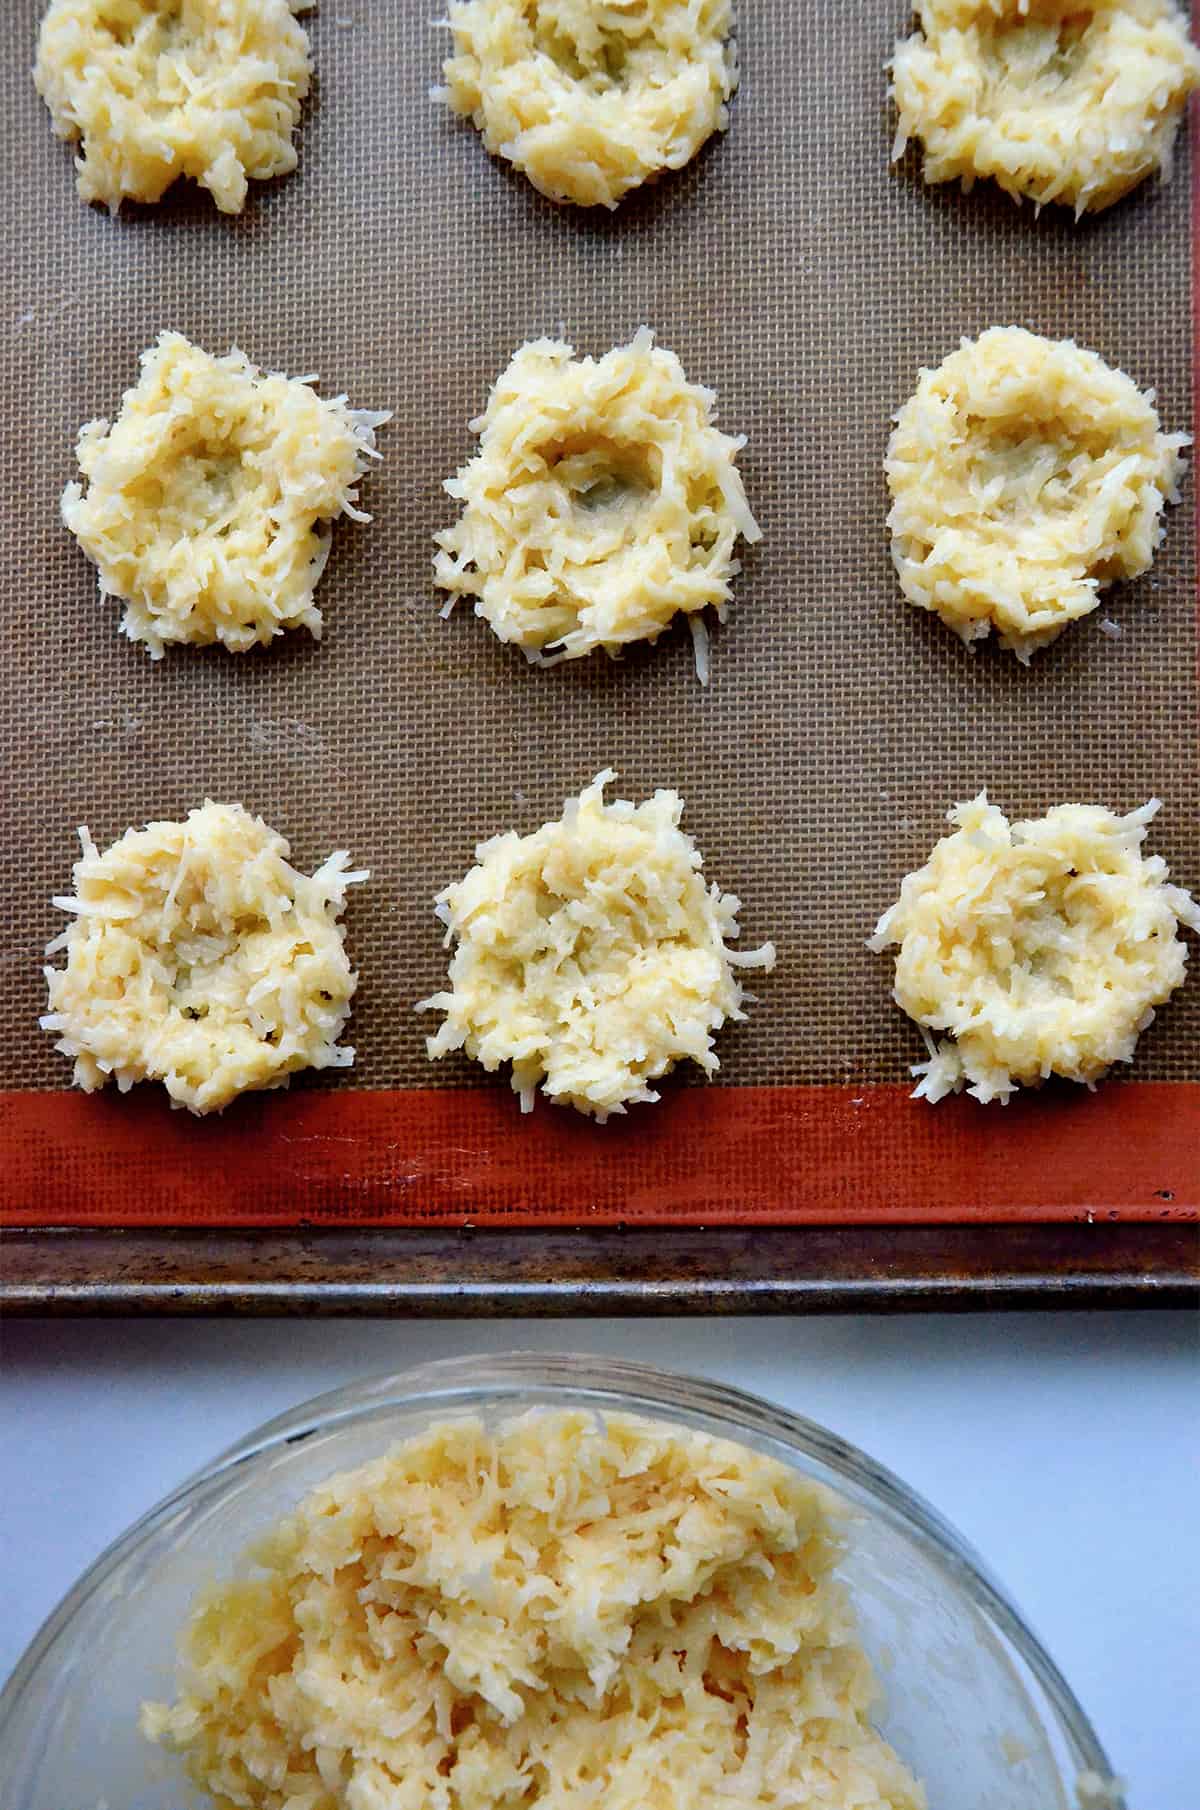 Coconut macaroon nests are lined up on a silpat baking sheet, ready to be baked. A bowl of macaroon batter in a glass bowl is nearby.